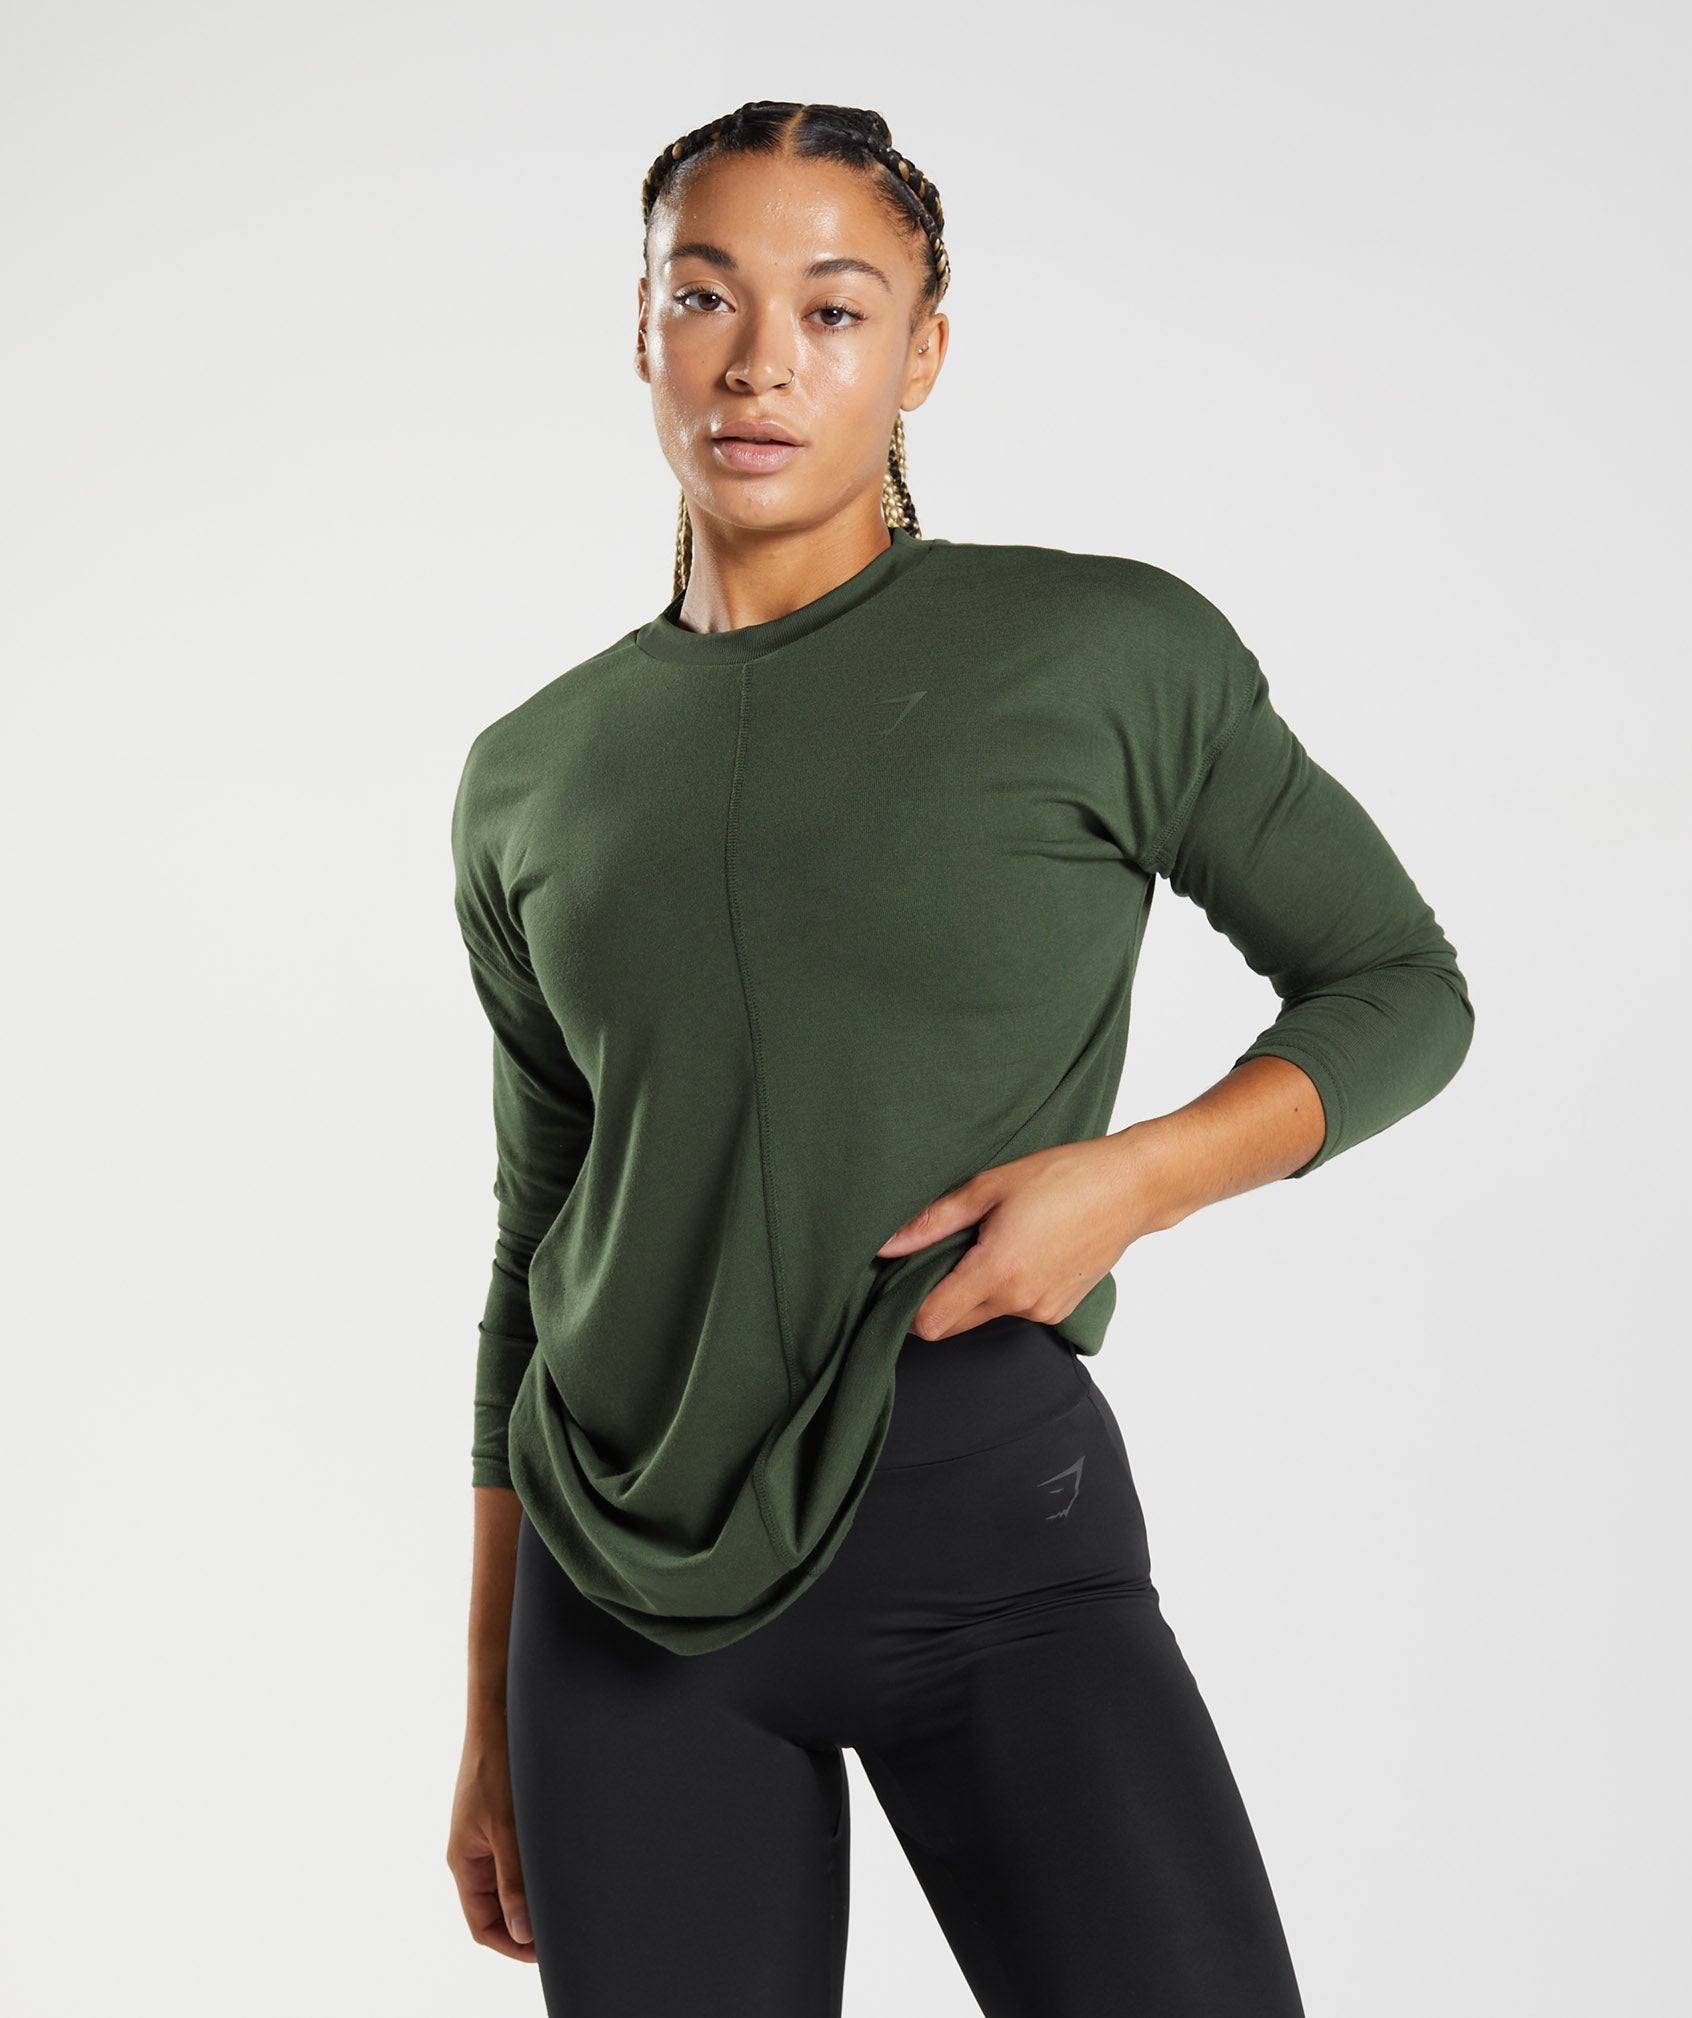 GS Power Long Sleeve T-Shirt in Moss Olive - view 1